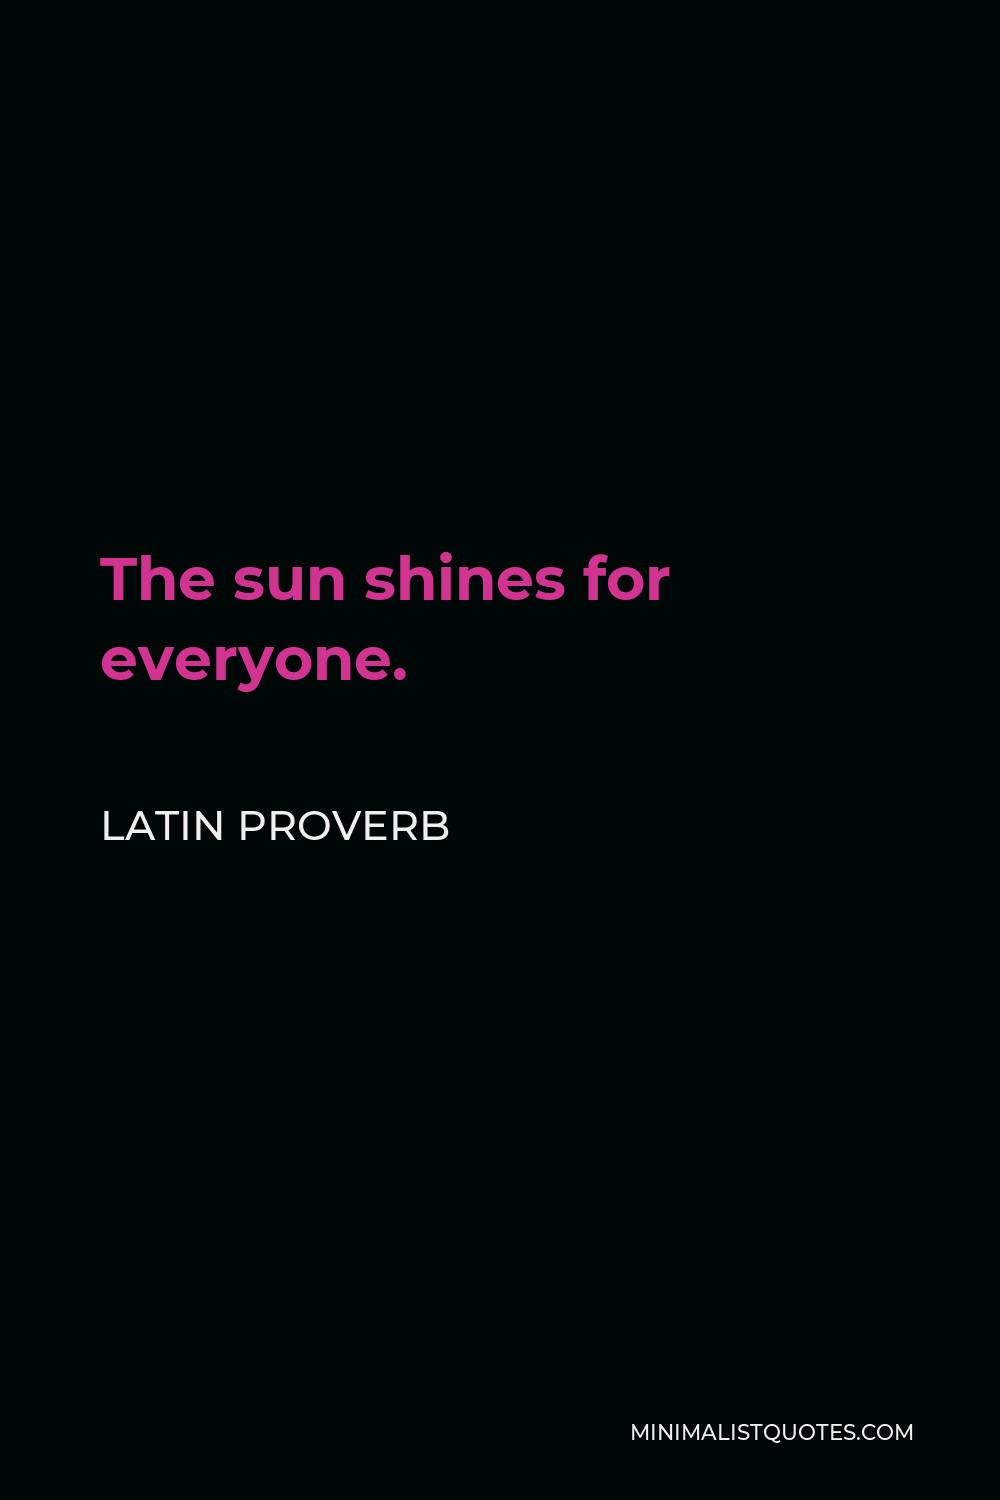 Latin Proverb Quote - The sun shines for everyone.